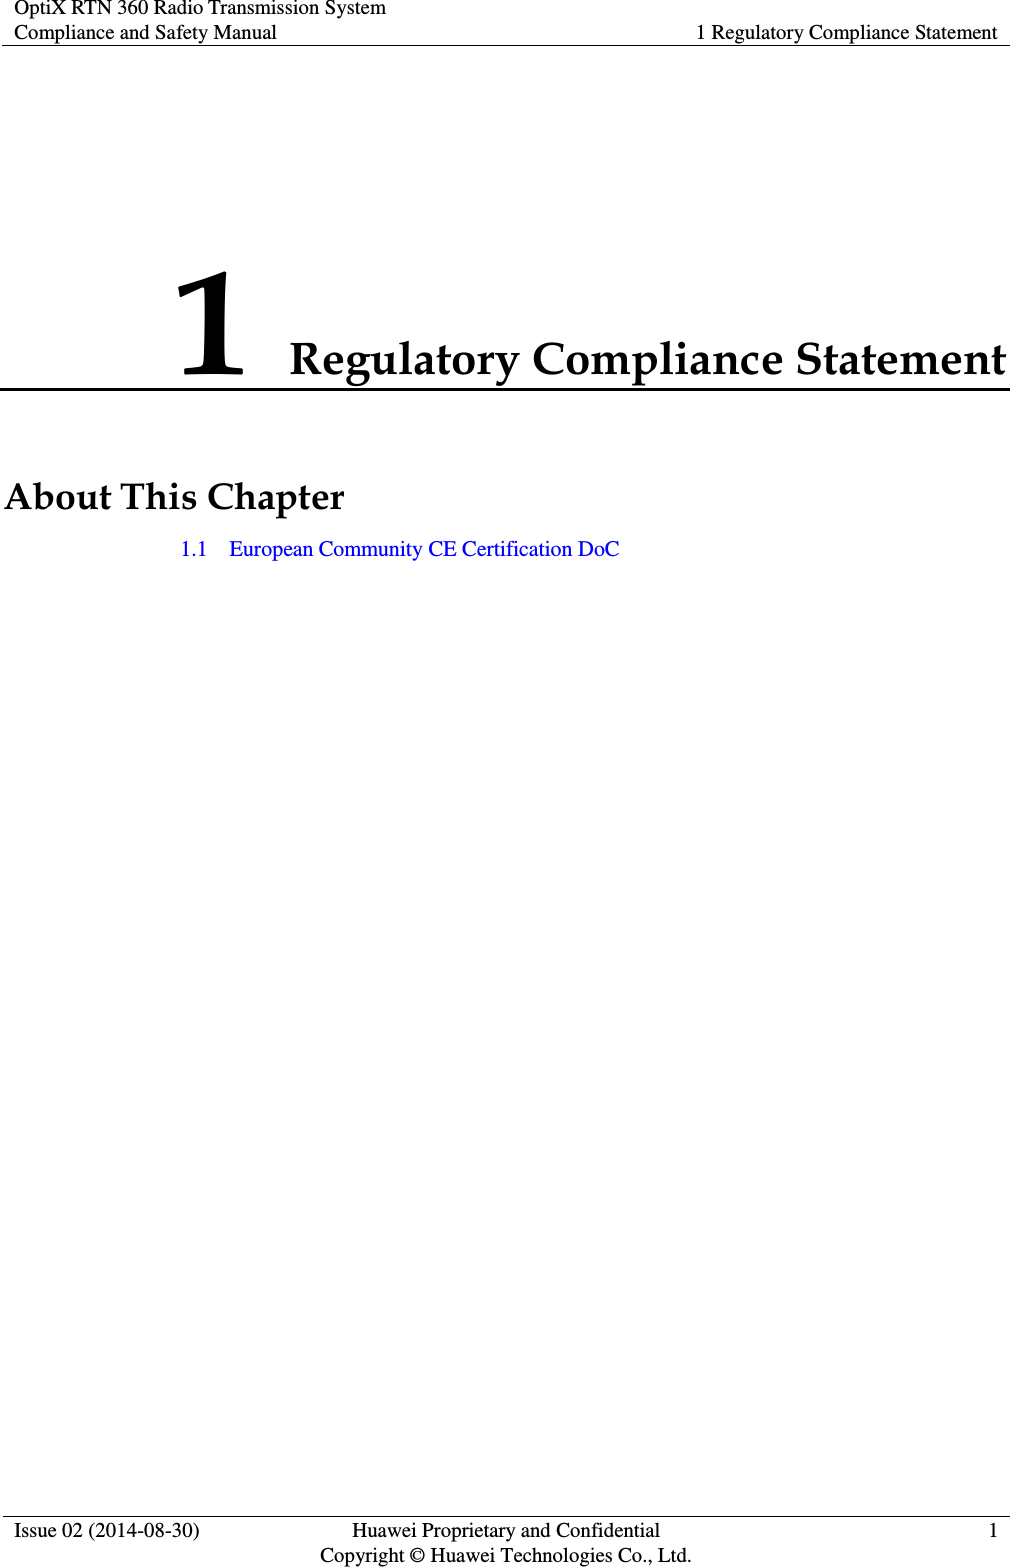 OptiX RTN 360 Radio Transmission System Compliance and Safety Manual 1 Regulatory Compliance Statement  Issue 02 (2014-08-30) Huawei Proprietary and Confidential                                     Copyright © Huawei Technologies Co., Ltd. 1  1 Regulatory Compliance Statement About This Chapter 1.1    European Community CE Certification DoC 